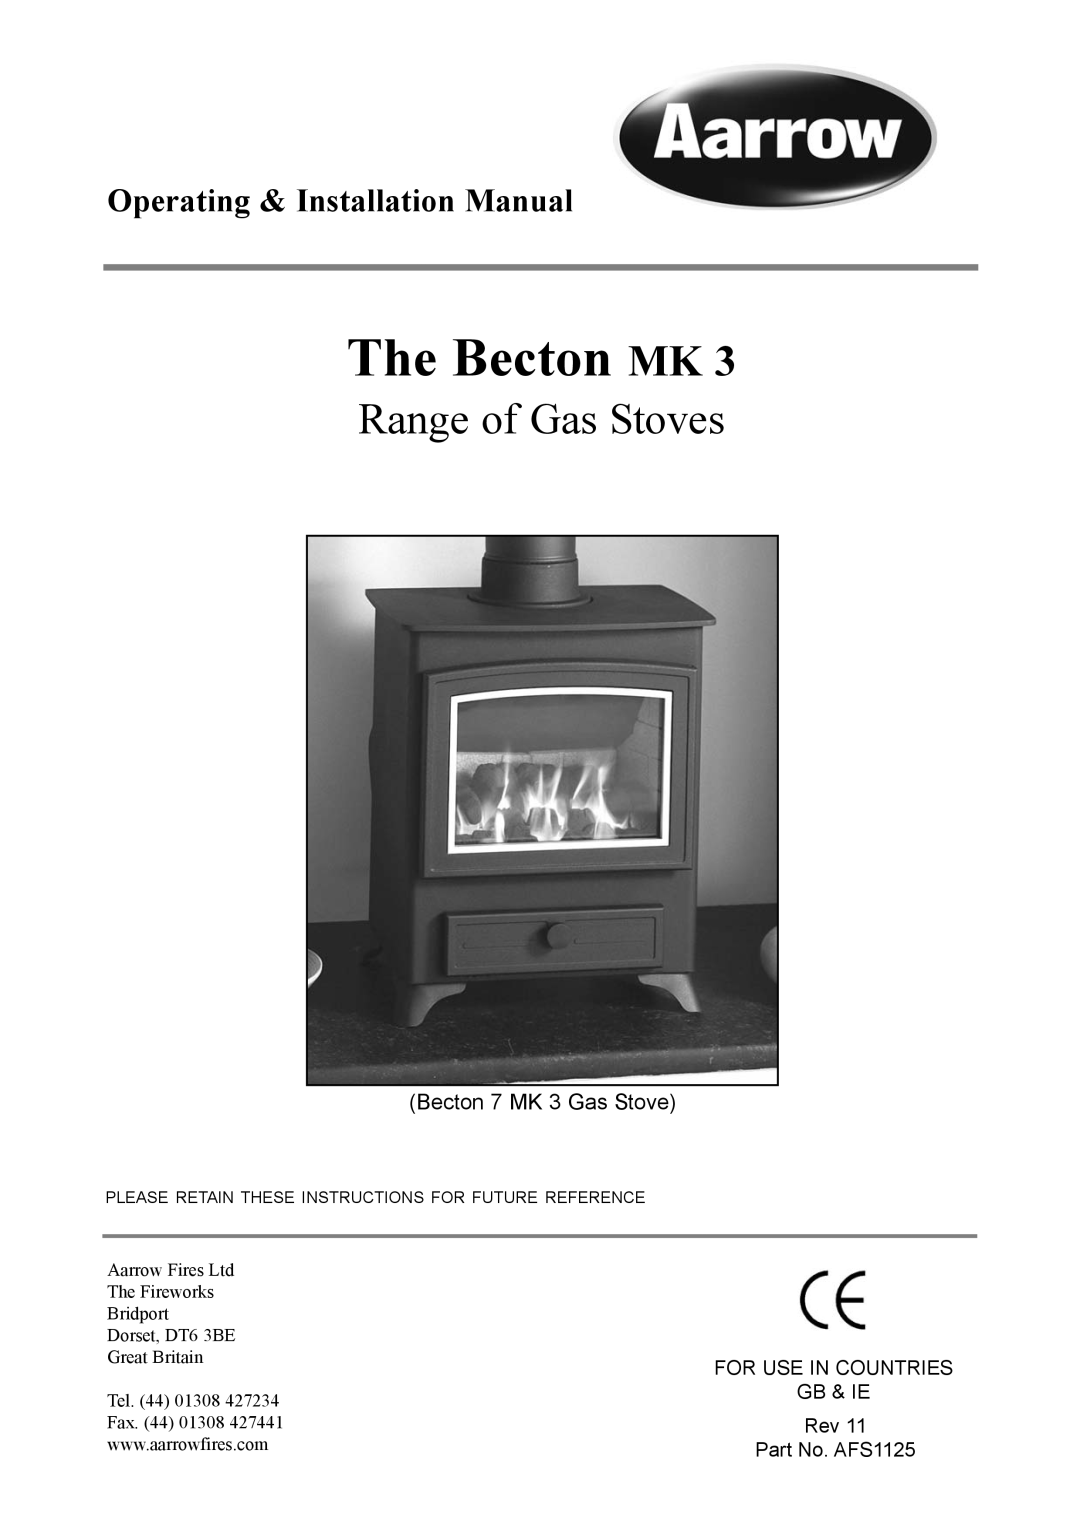 Aarrow Fires Becton 7 mk3 installation manual Range of Gas Stoves, The Becton MK, Operating & Installation Manual, Gb & Ie 